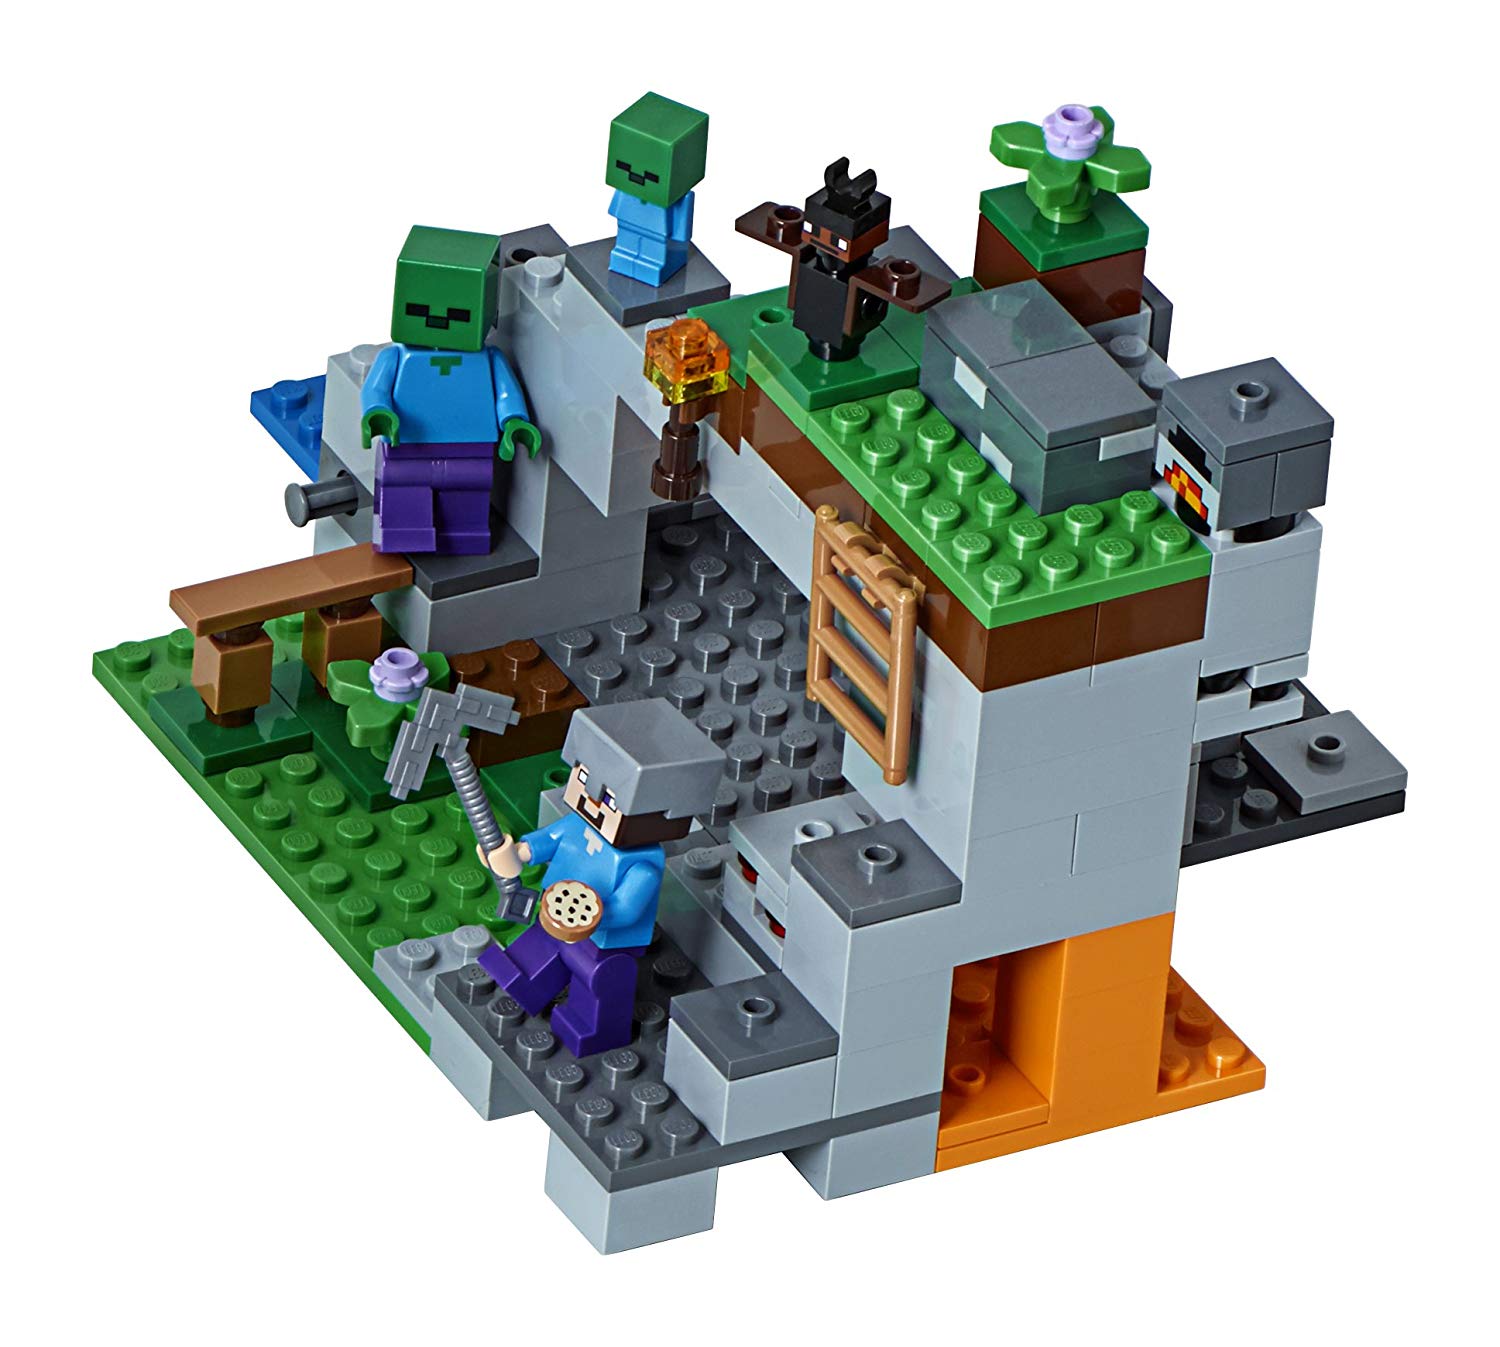 LEGO Minecraft 21141 The Zombie Cave – Hang động Zombie